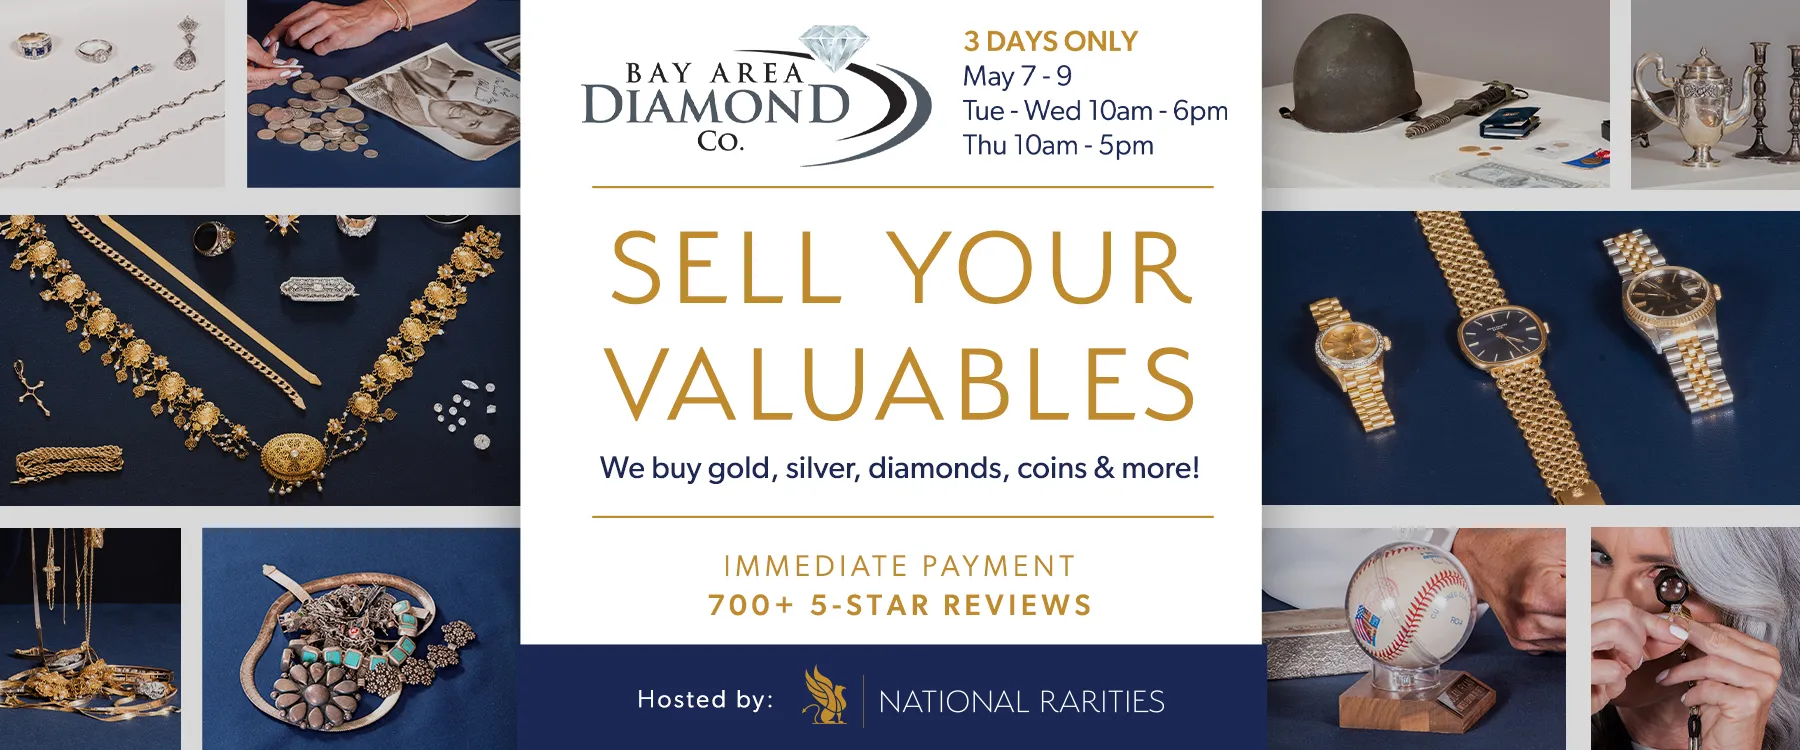 Estate Buying Event  Bay Area Diamond Company is partnering with National Rarities for a three day Buying Event! From November 